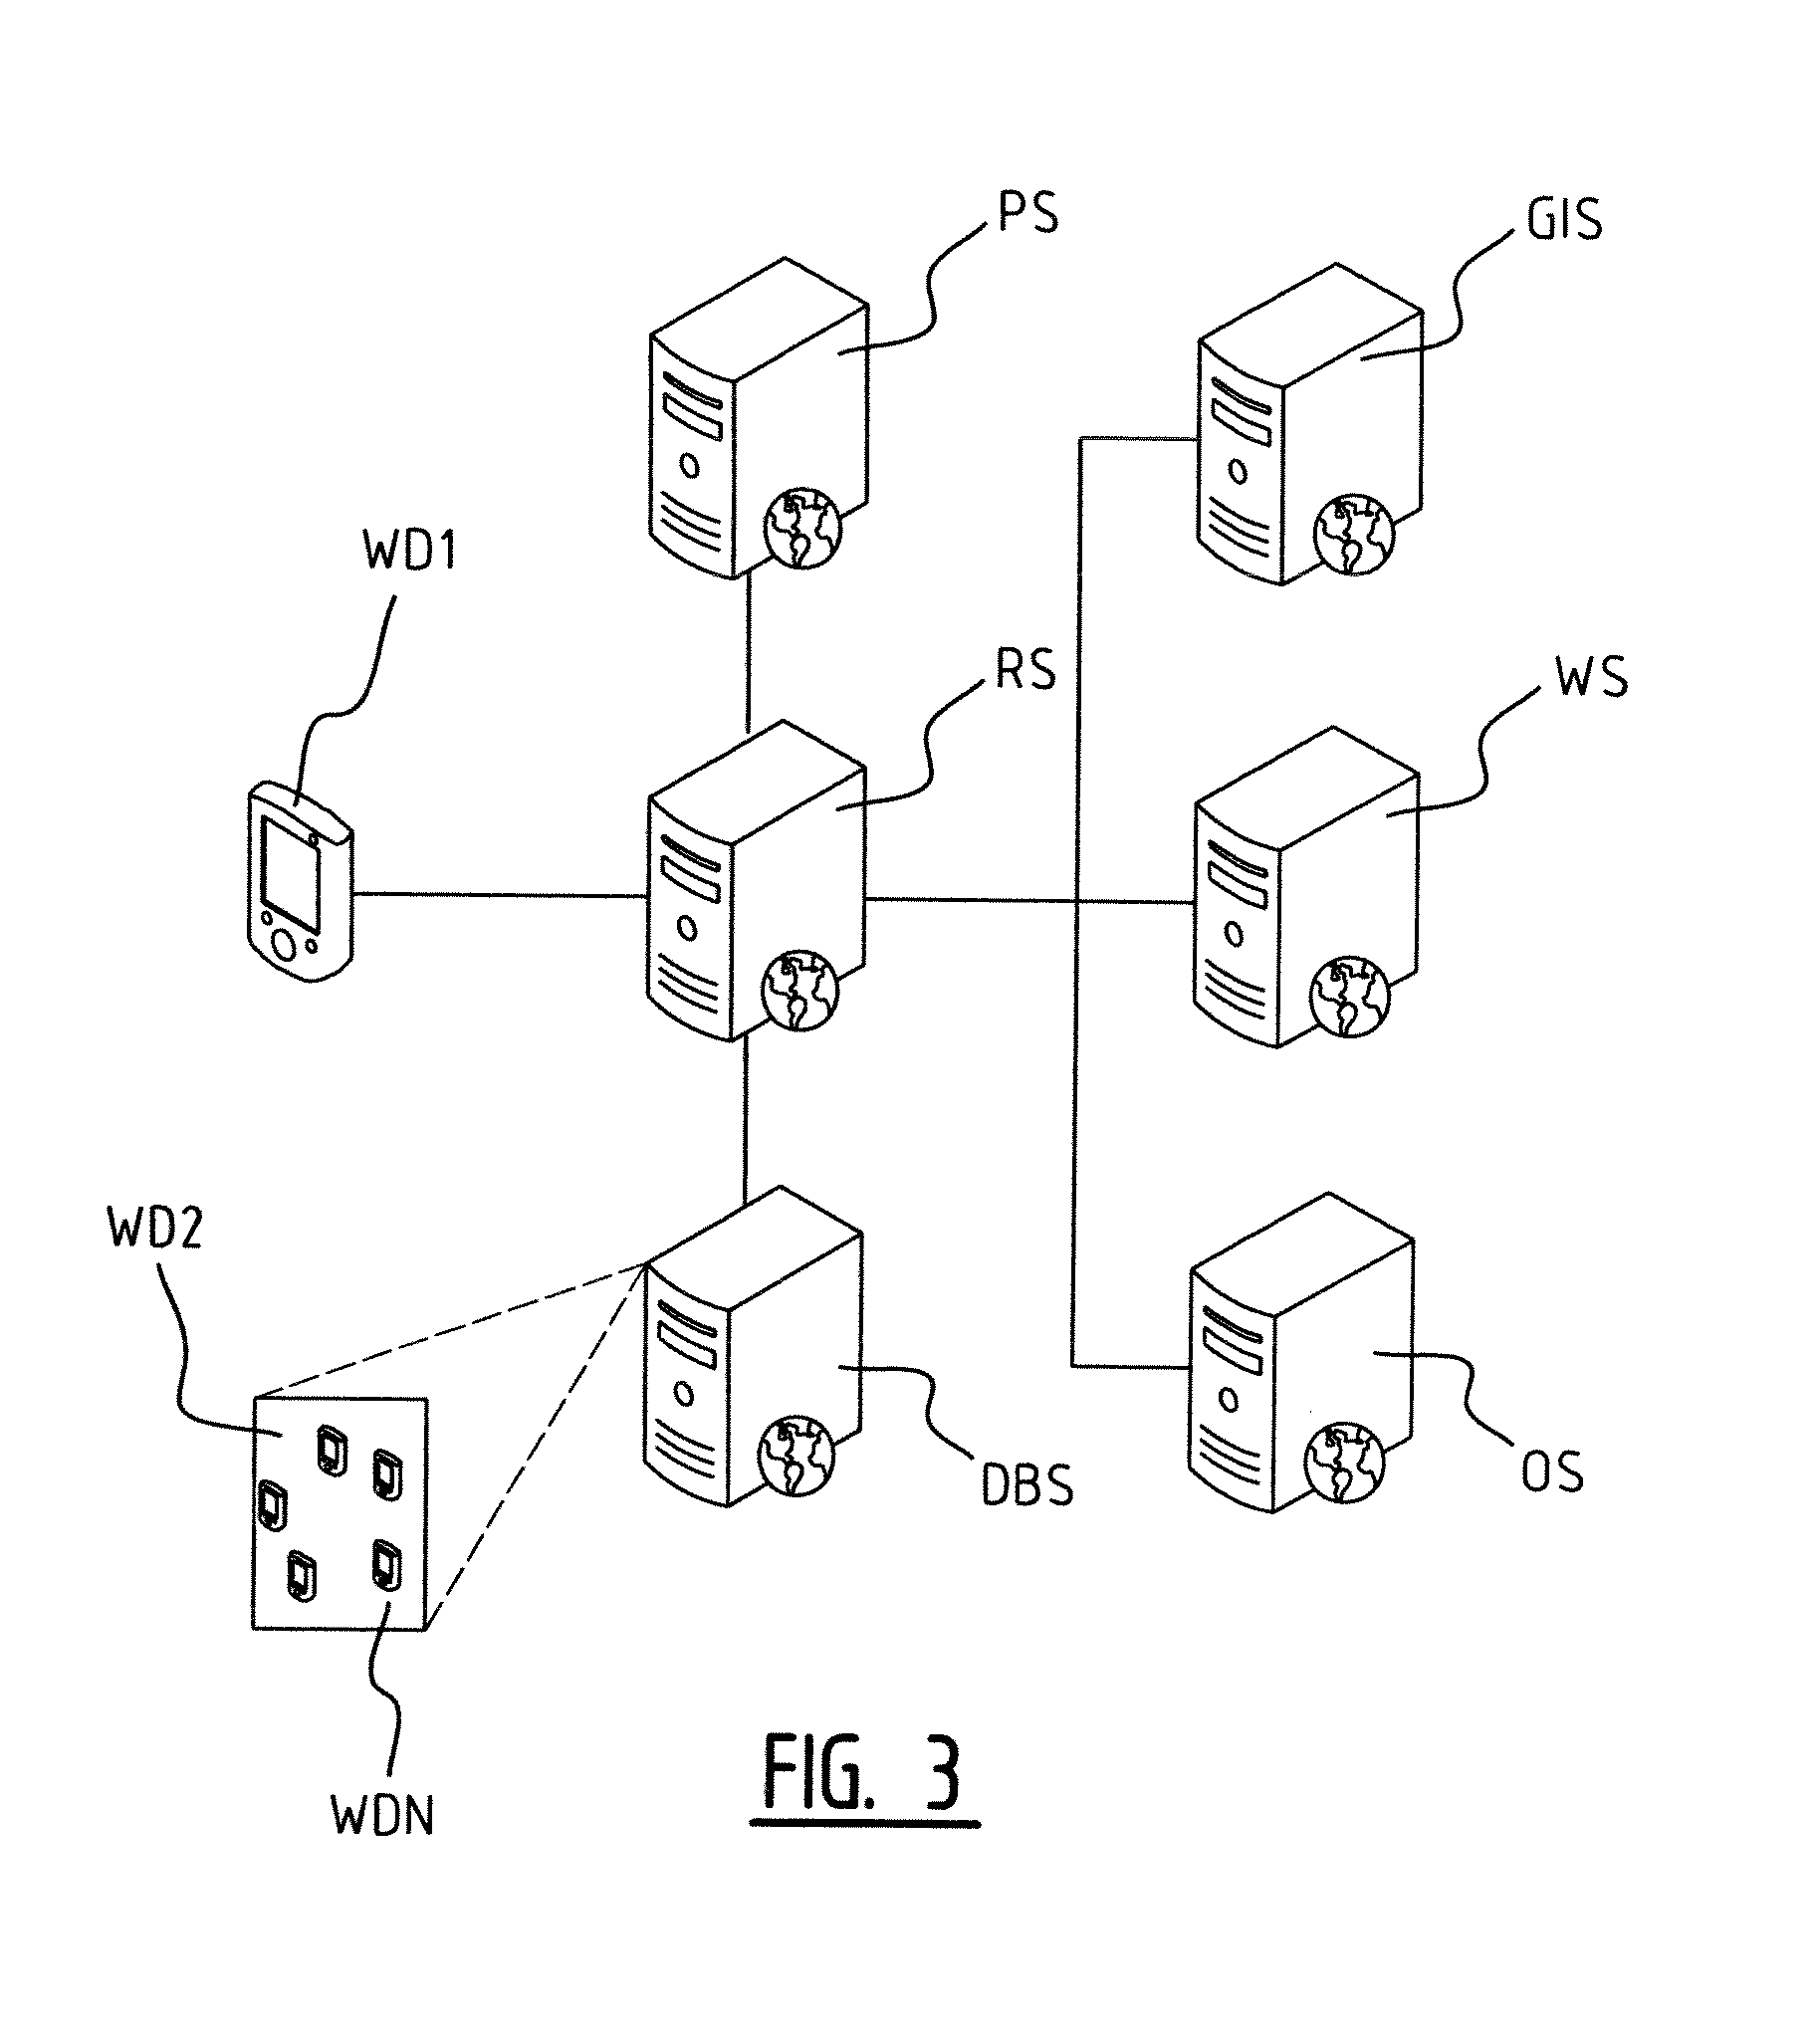 Method and system for retrieving a lost entity, and cell-based wireless network adapted therefore